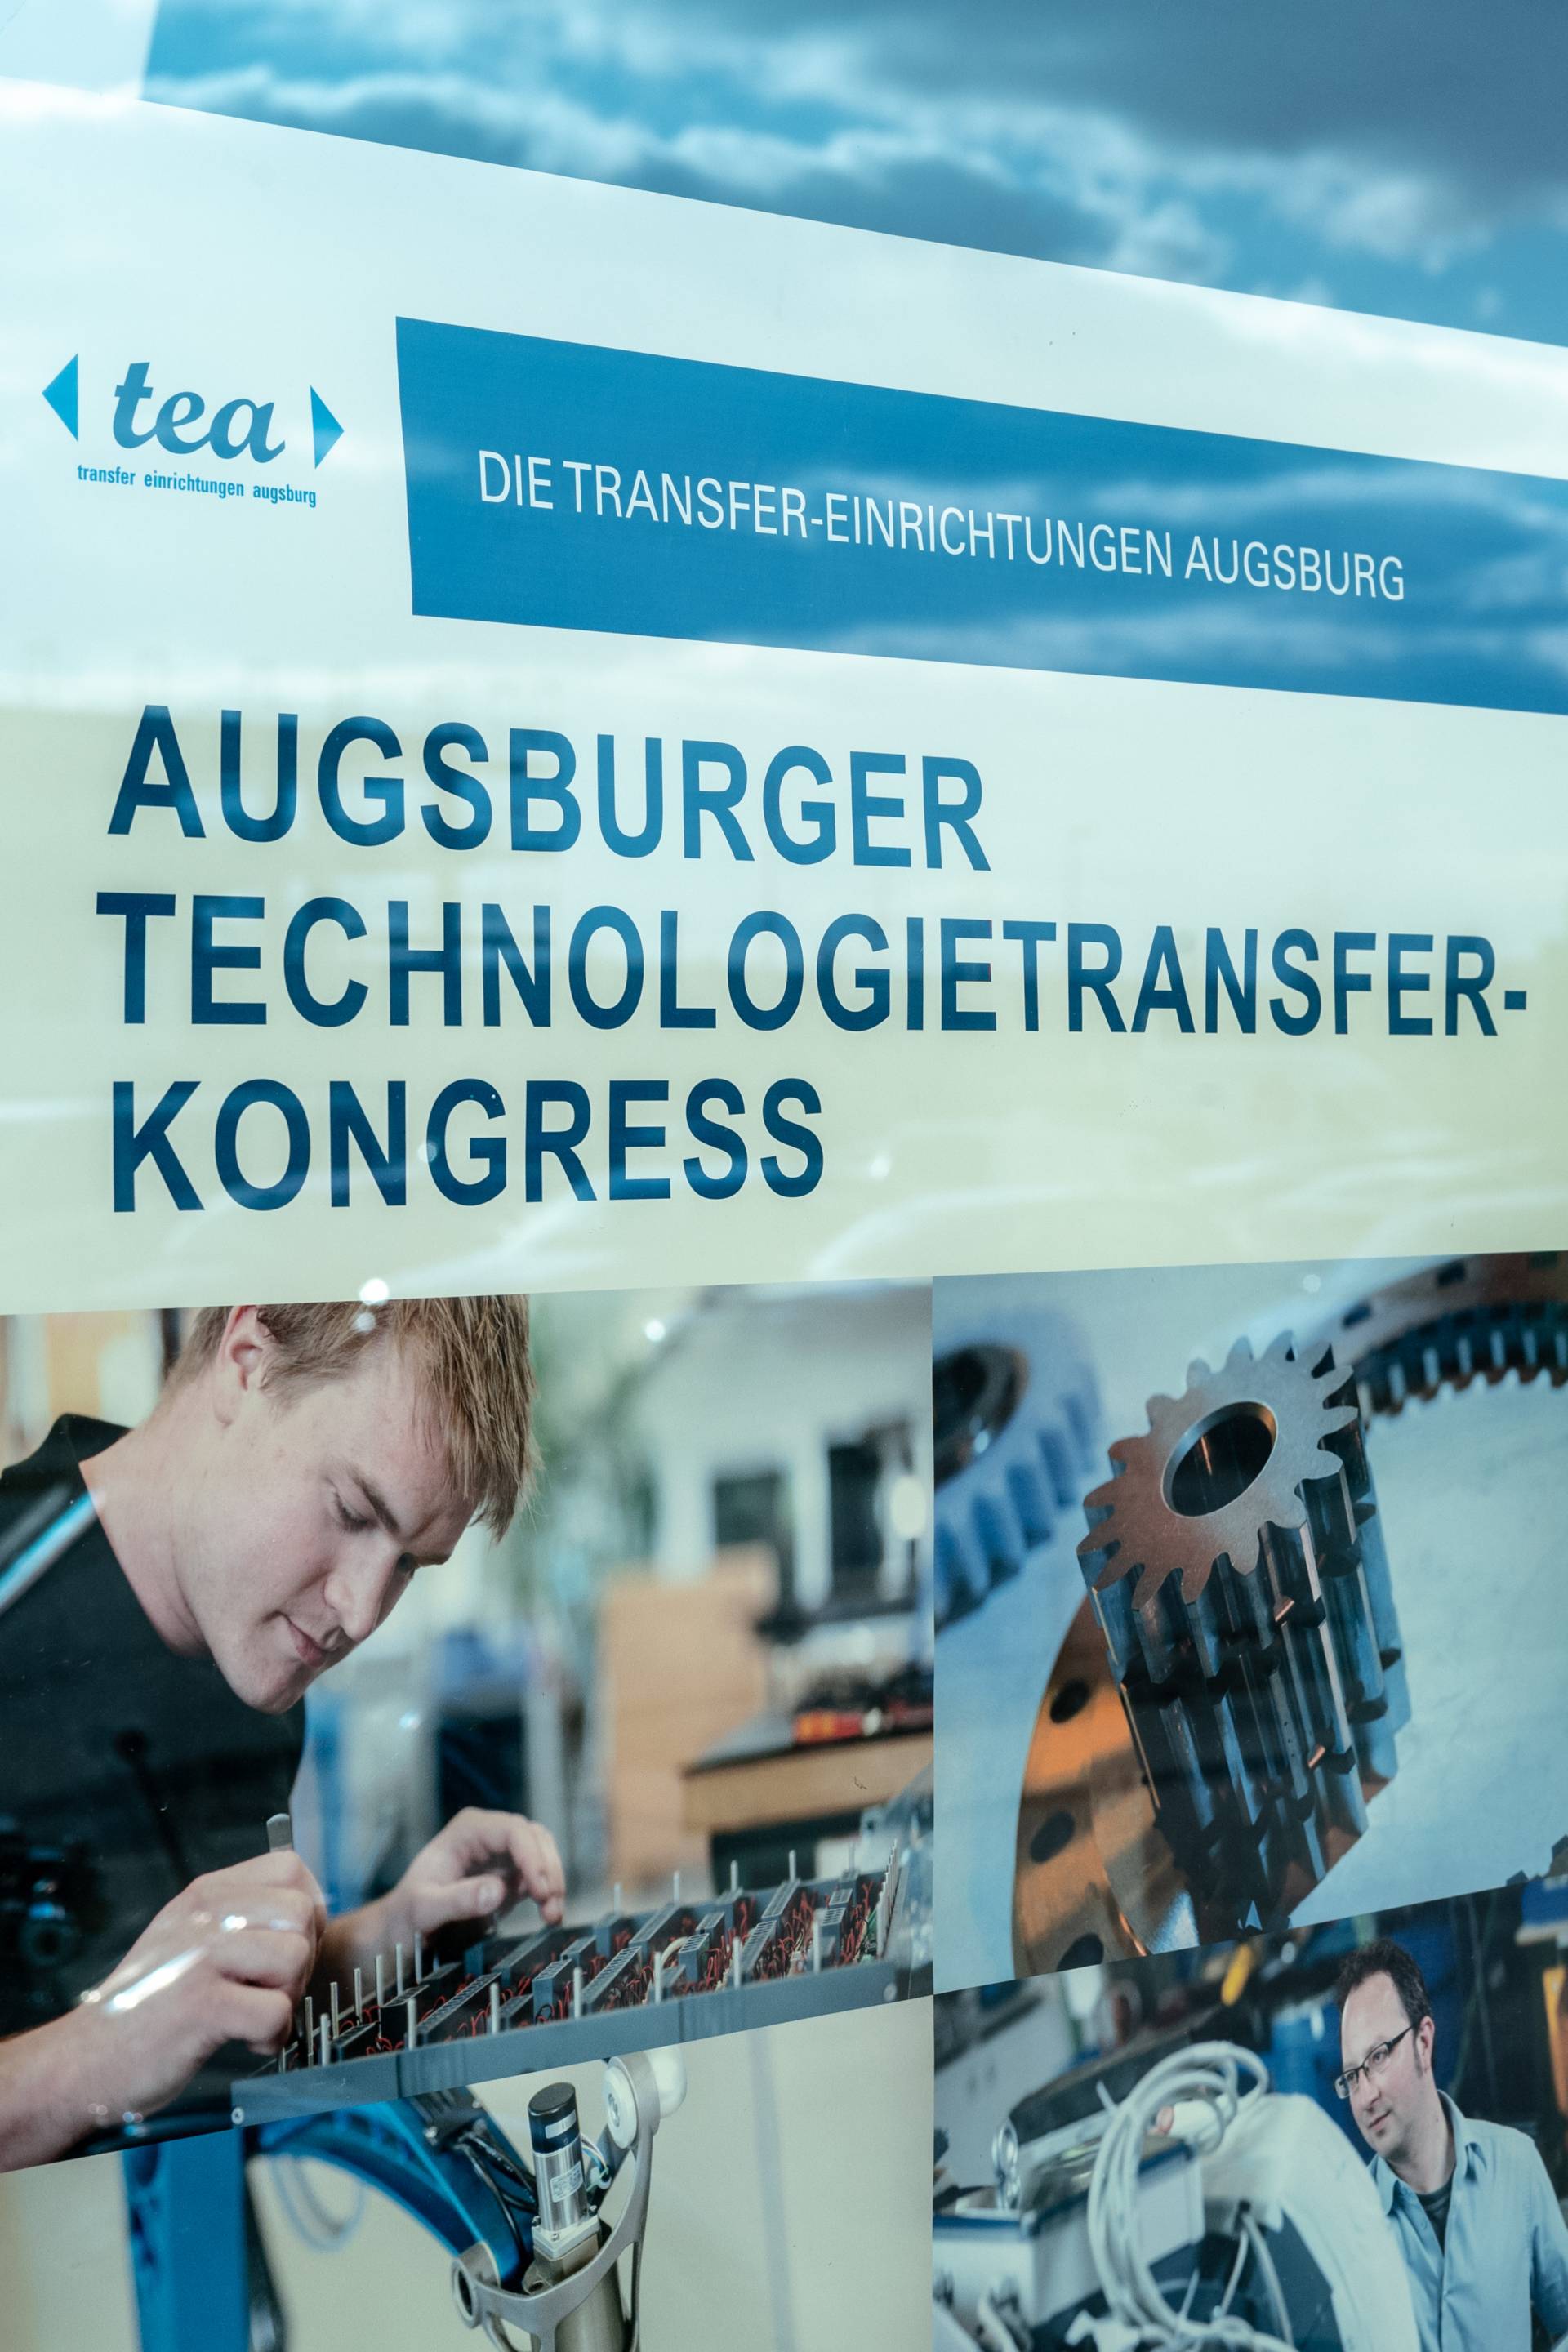 Once a year, the Augsburg transfer institutions invite you to the Technology Transfer Congress.